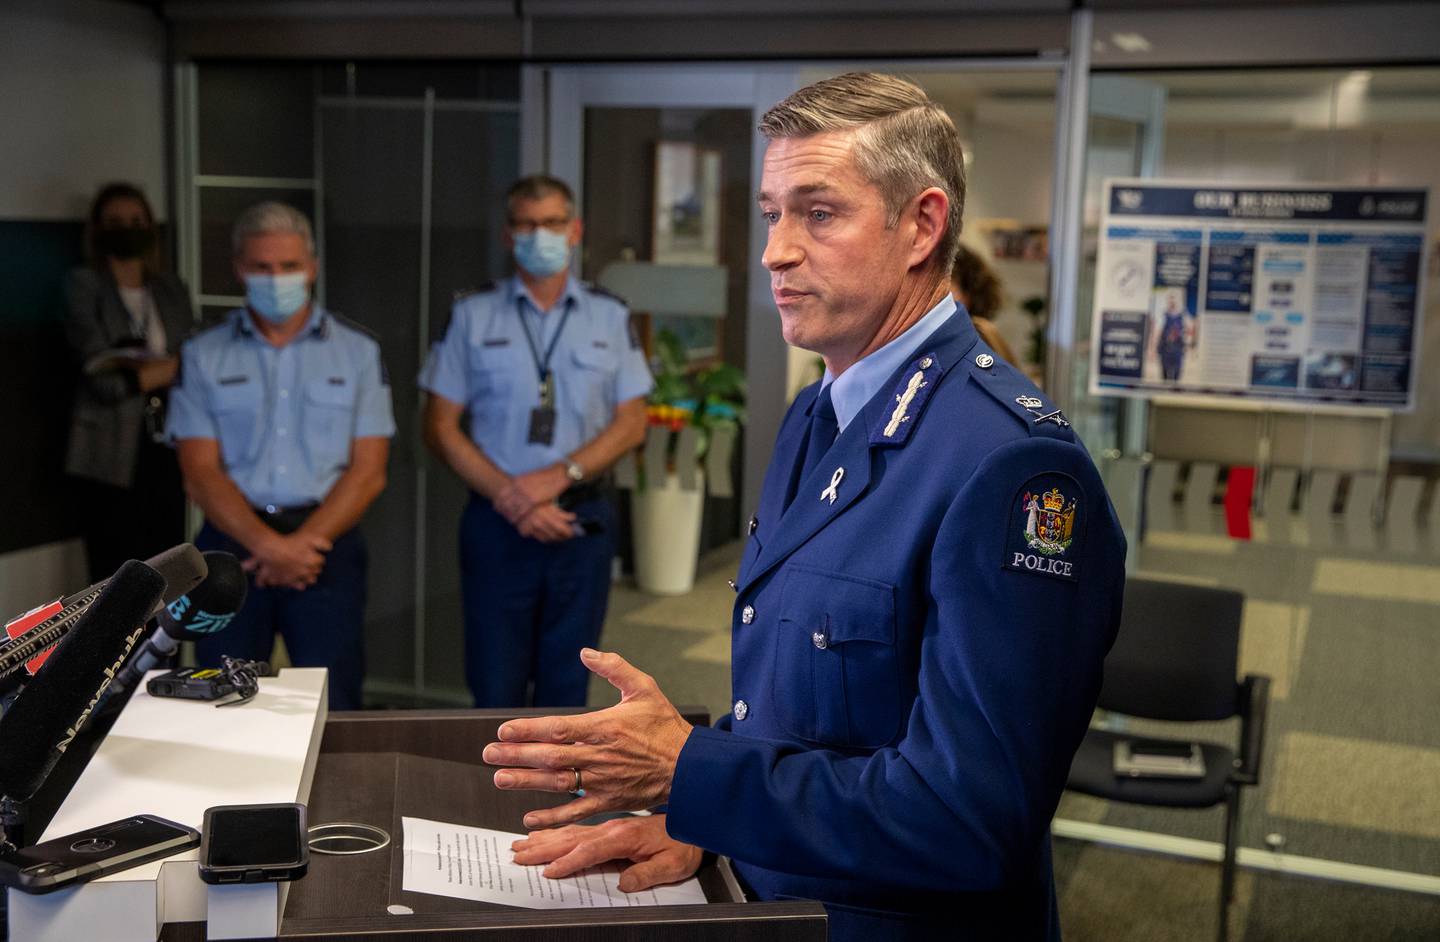 Police Commissioner Andrew Coster at a media conference in Wellington, where he warned protesters to move their vehicles from around Parliament. Photo / Mark Mitchell